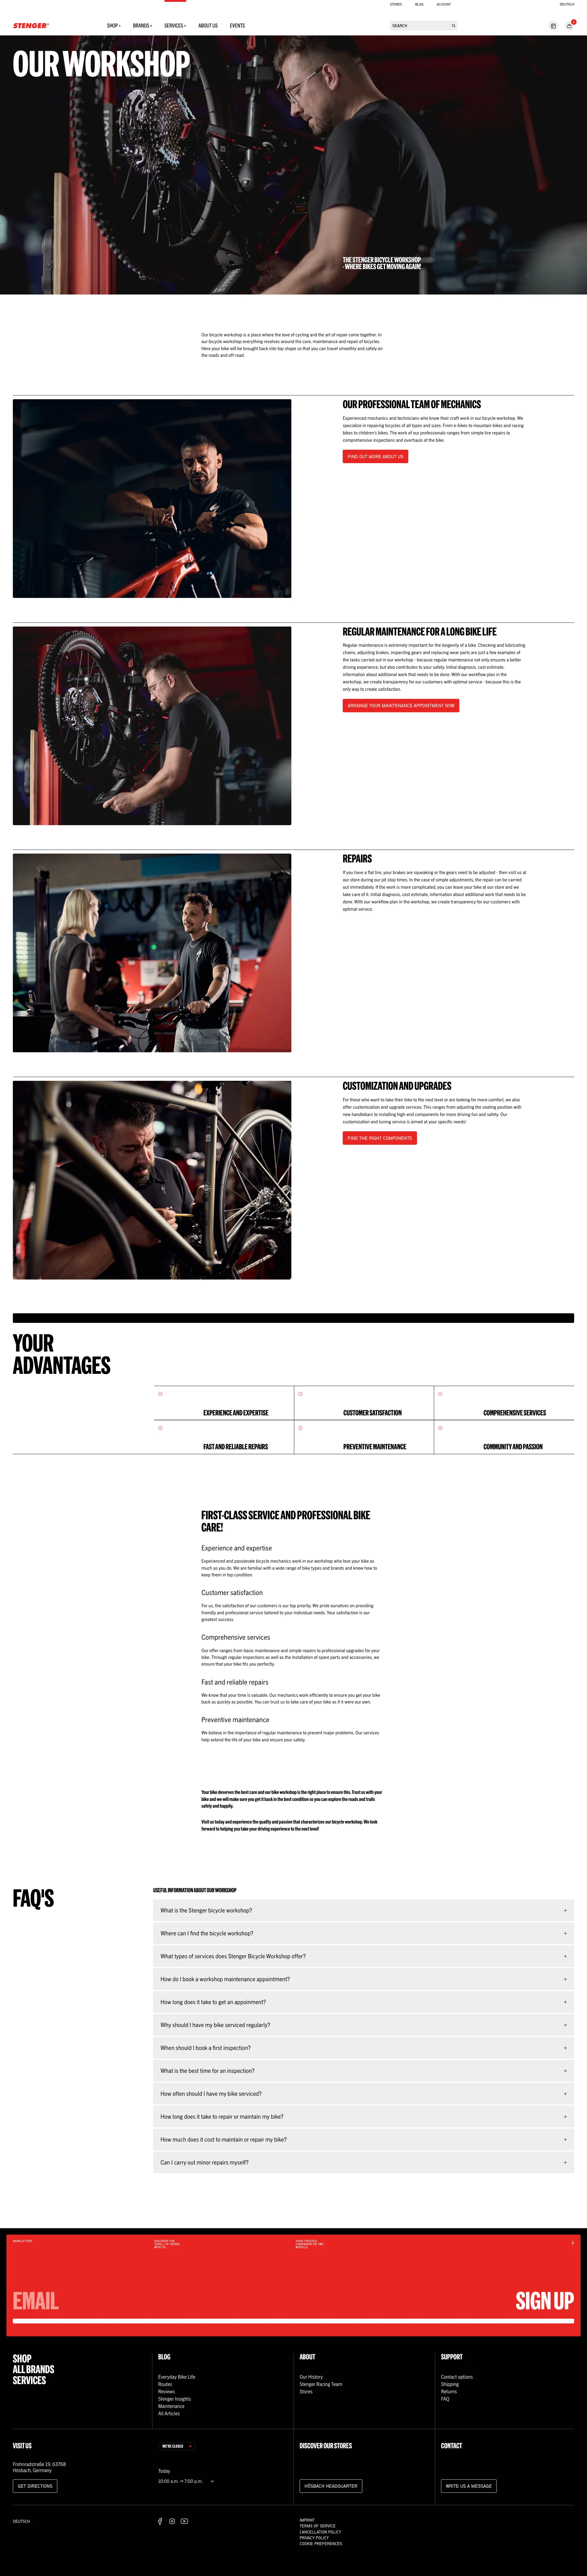 Stenger Bike Landing Page Example: Explore a world of cycling passion at Zweirad Stenger GmbH, where quality bikes and accessories meet enthusiasm on two wheels. Visit our online store for everything your biking heart desires, from the latest models to trusted tools and gear. Kickstart your cycling journey with us!